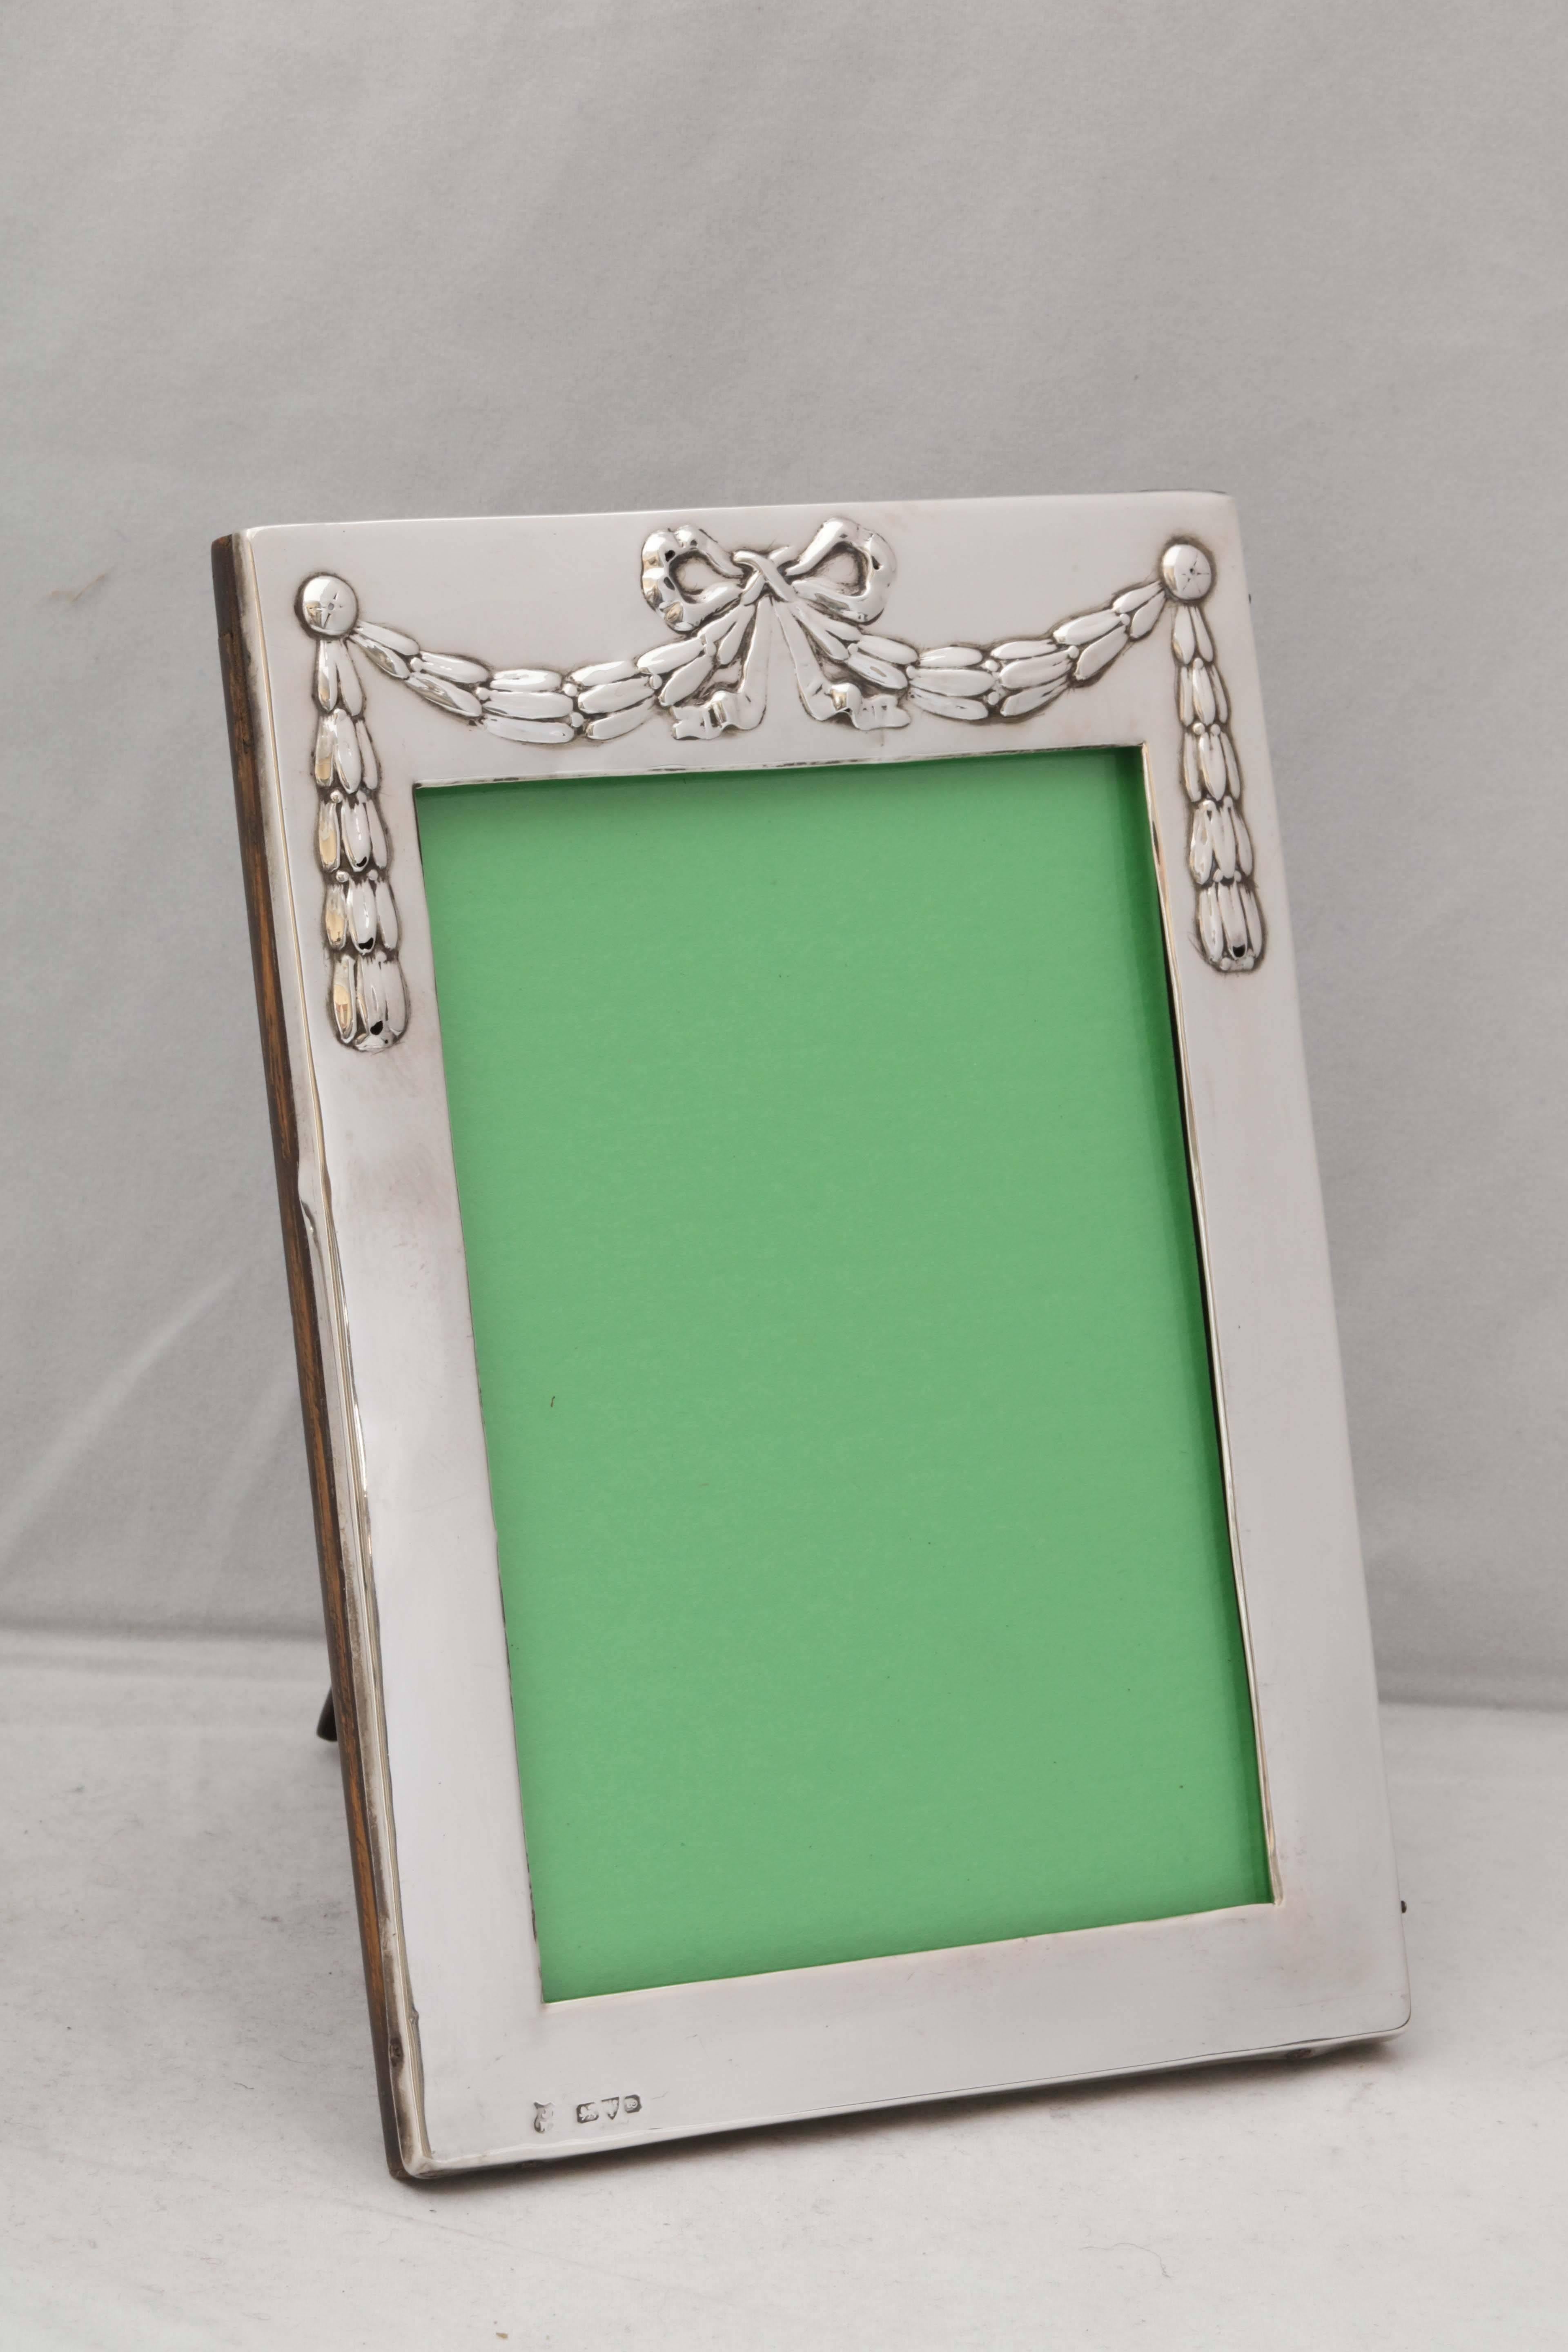 Edwardian, sterling silver picture frame, Chester, England, 1905, James Deakin & Sons - Makers. Frame is decorated with a large 